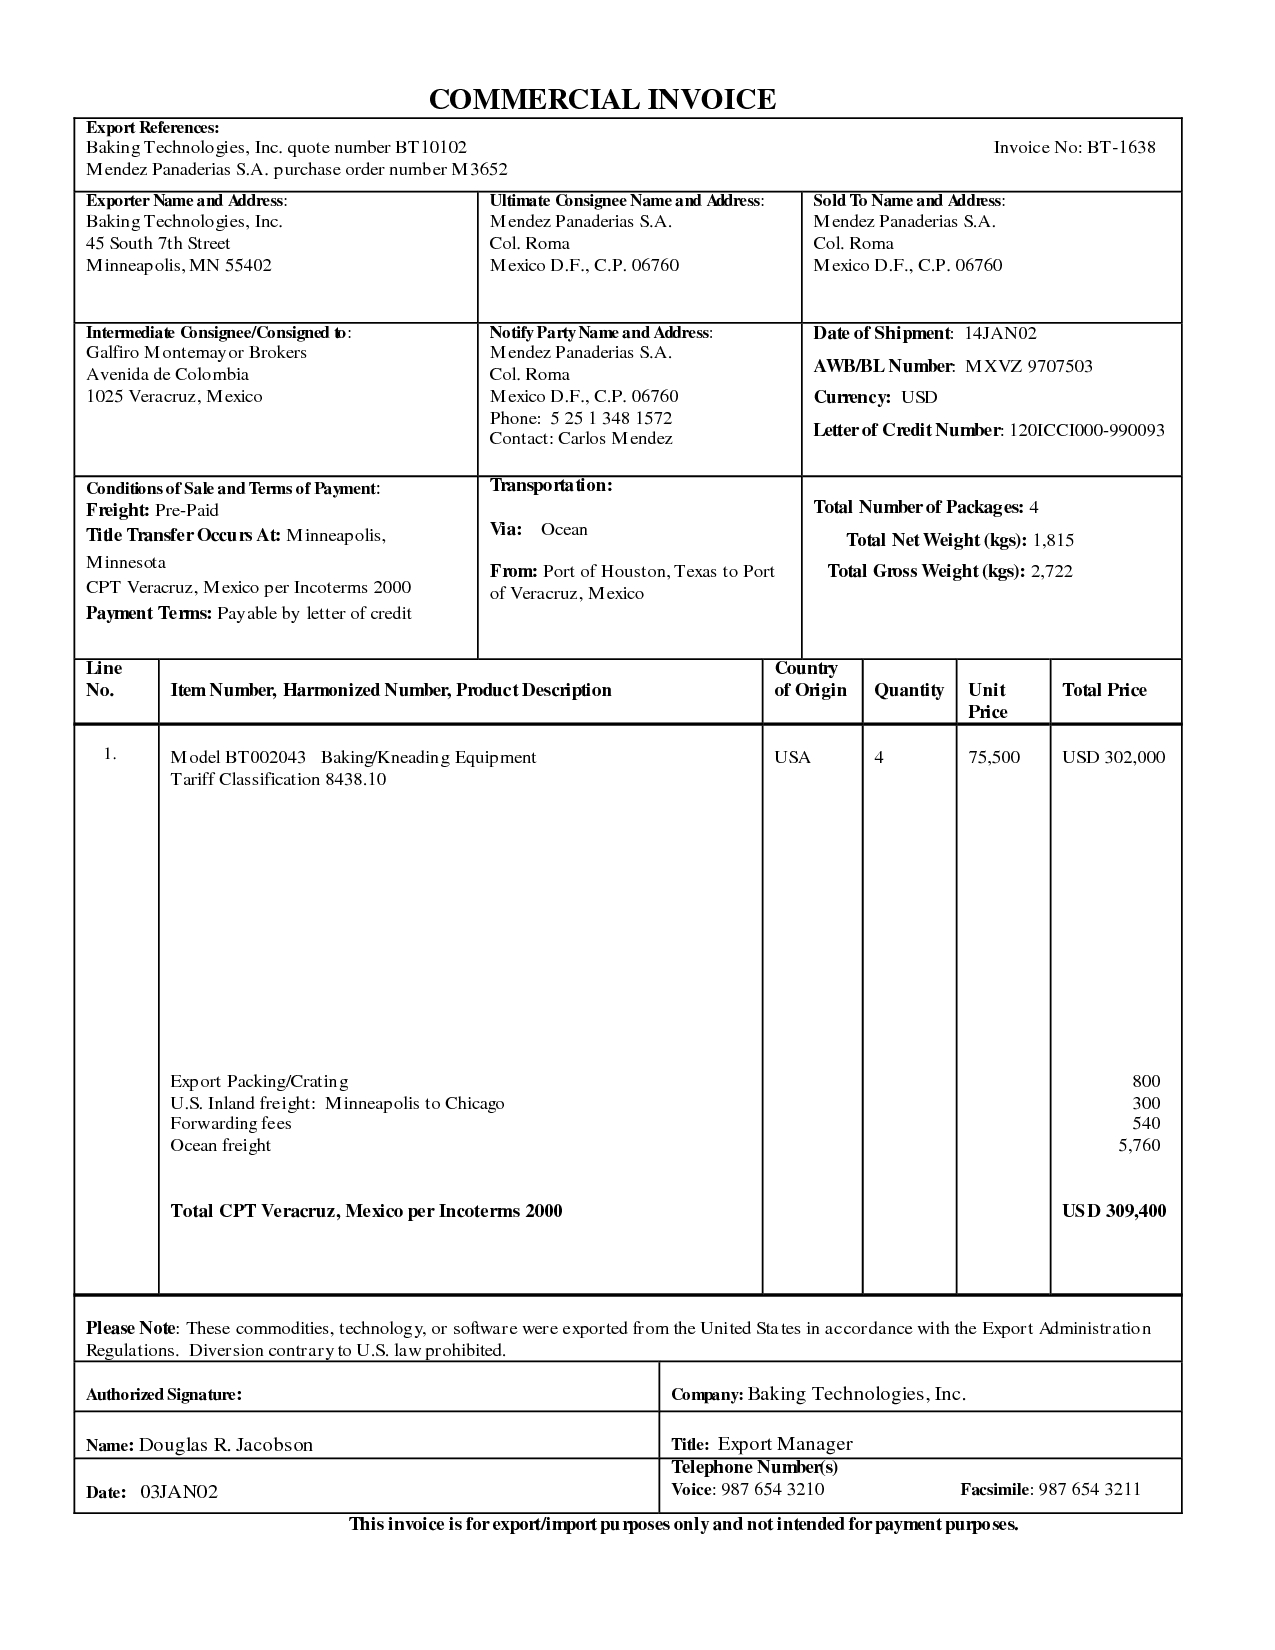 photo sample of a commercial invoice images example of commercial invoice